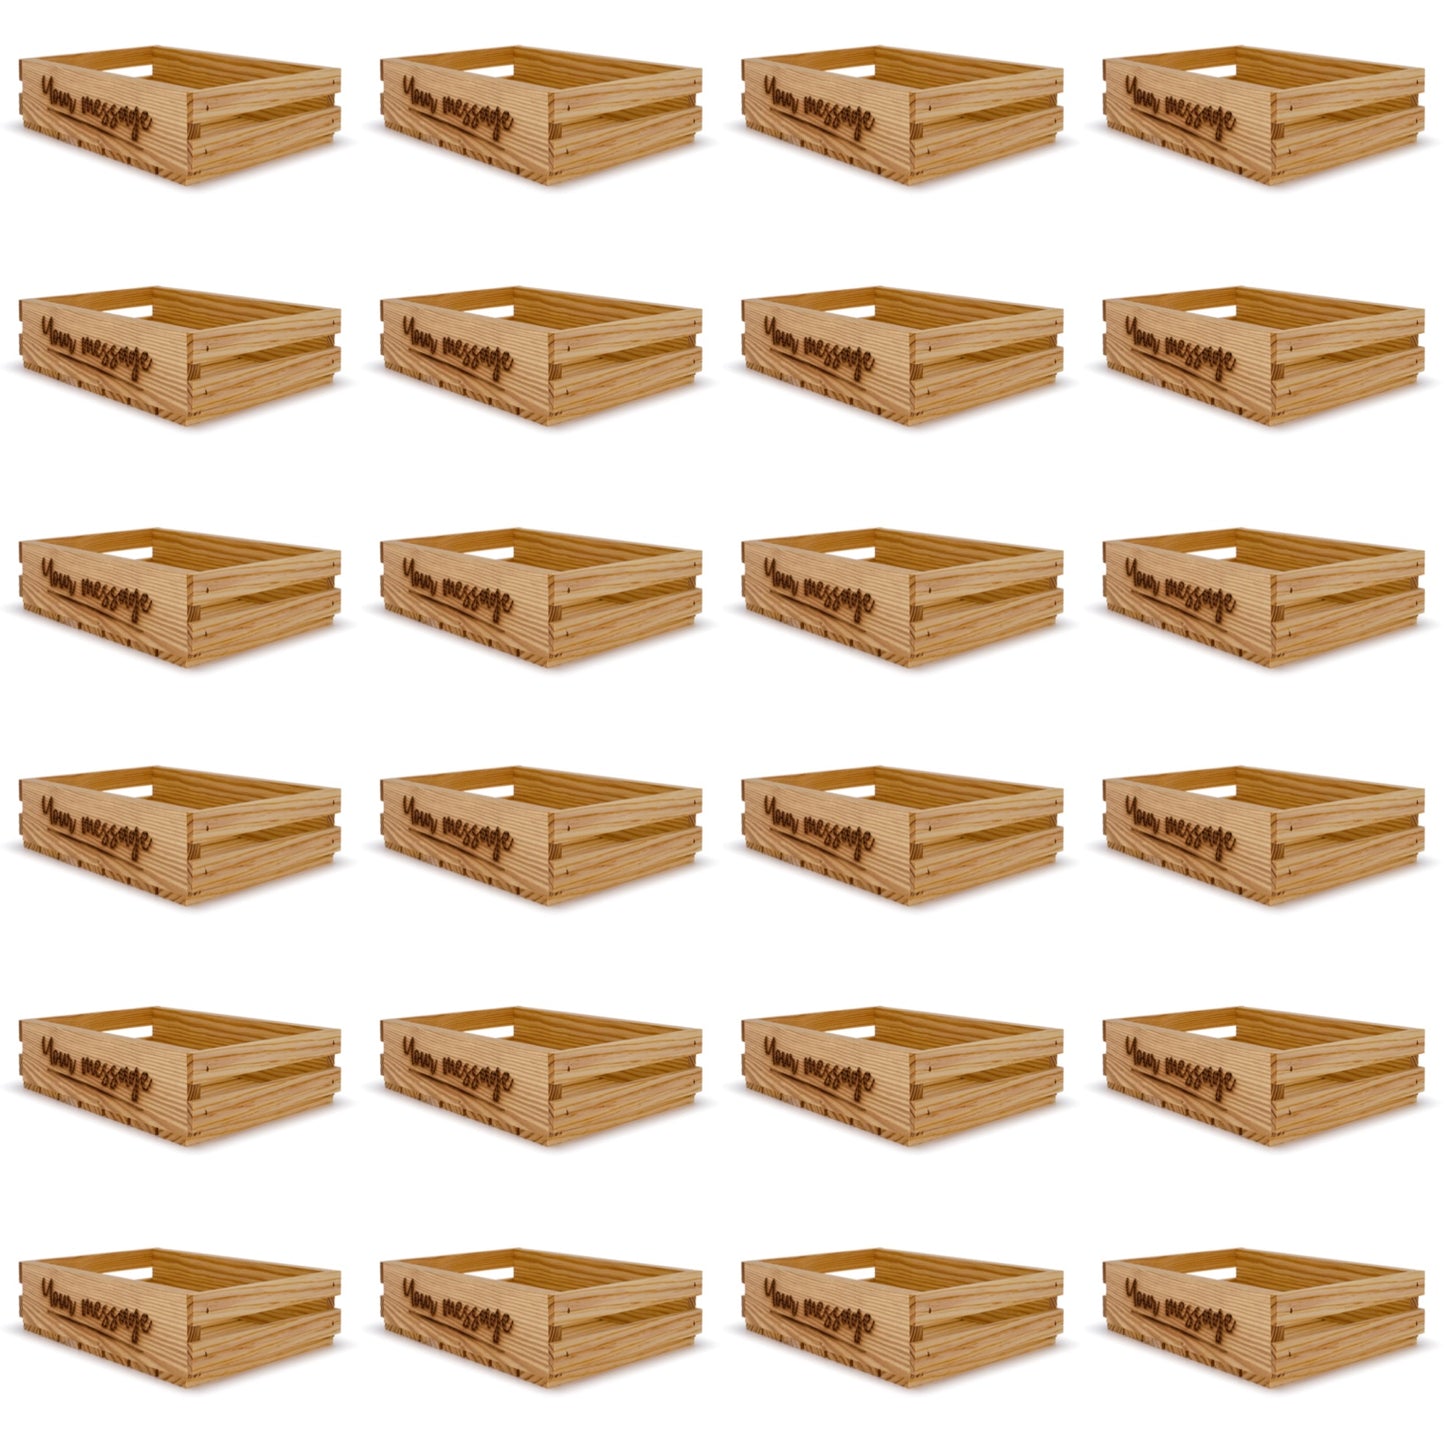 24 Small wooden crates 9x14x3.5 your message included